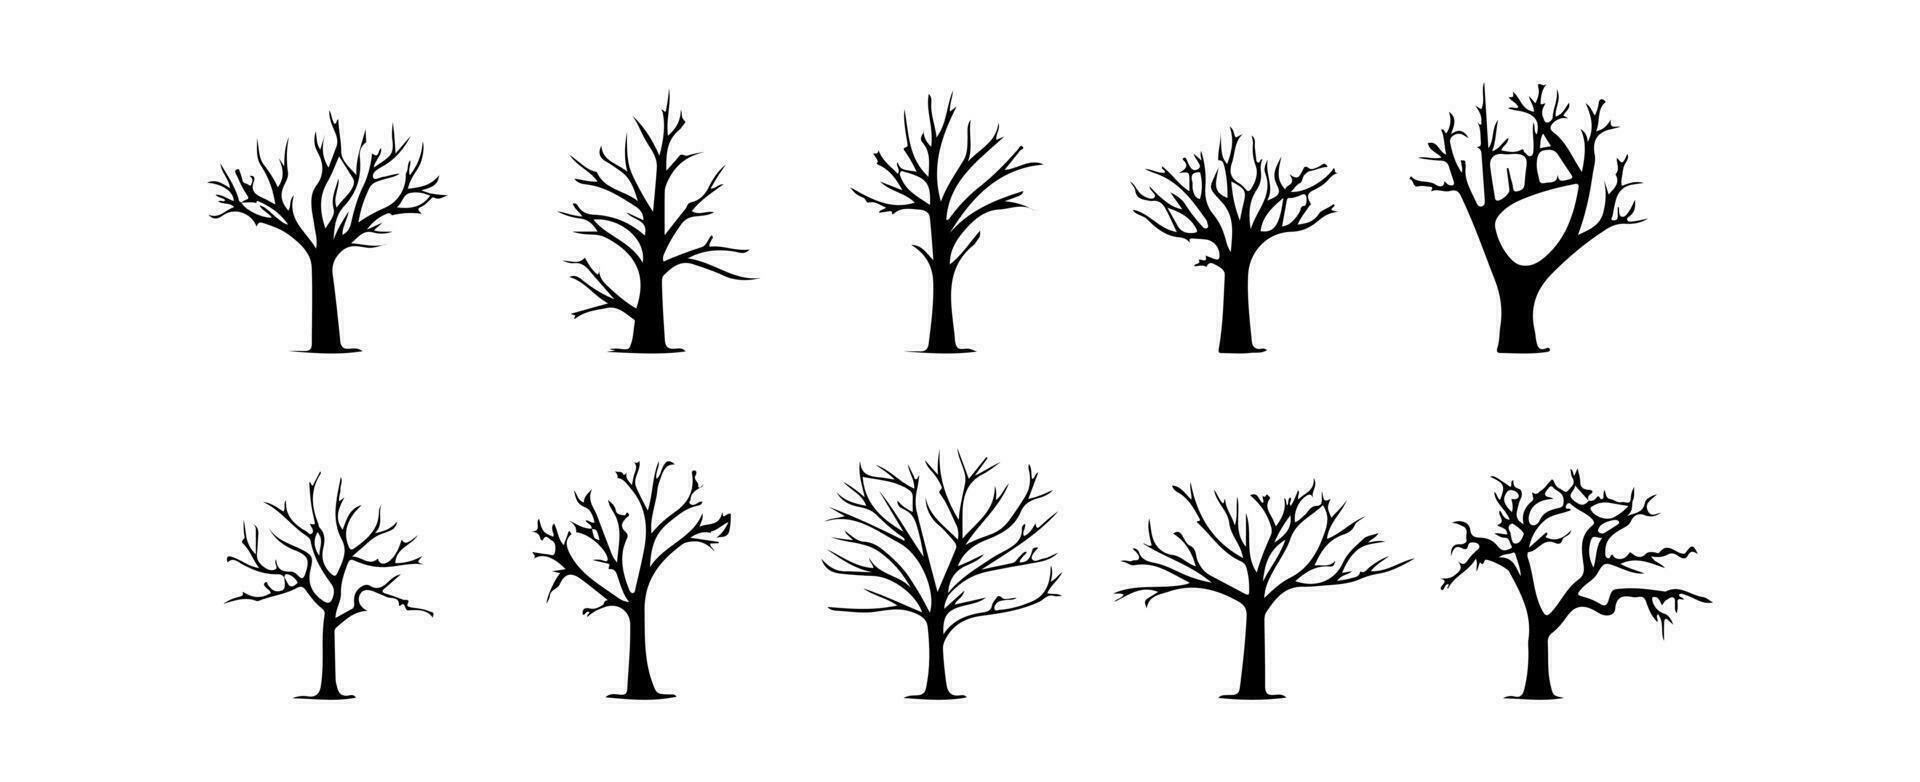 Set of dead tree silhouettes isolated on white background. Simple naked trees vector illustration